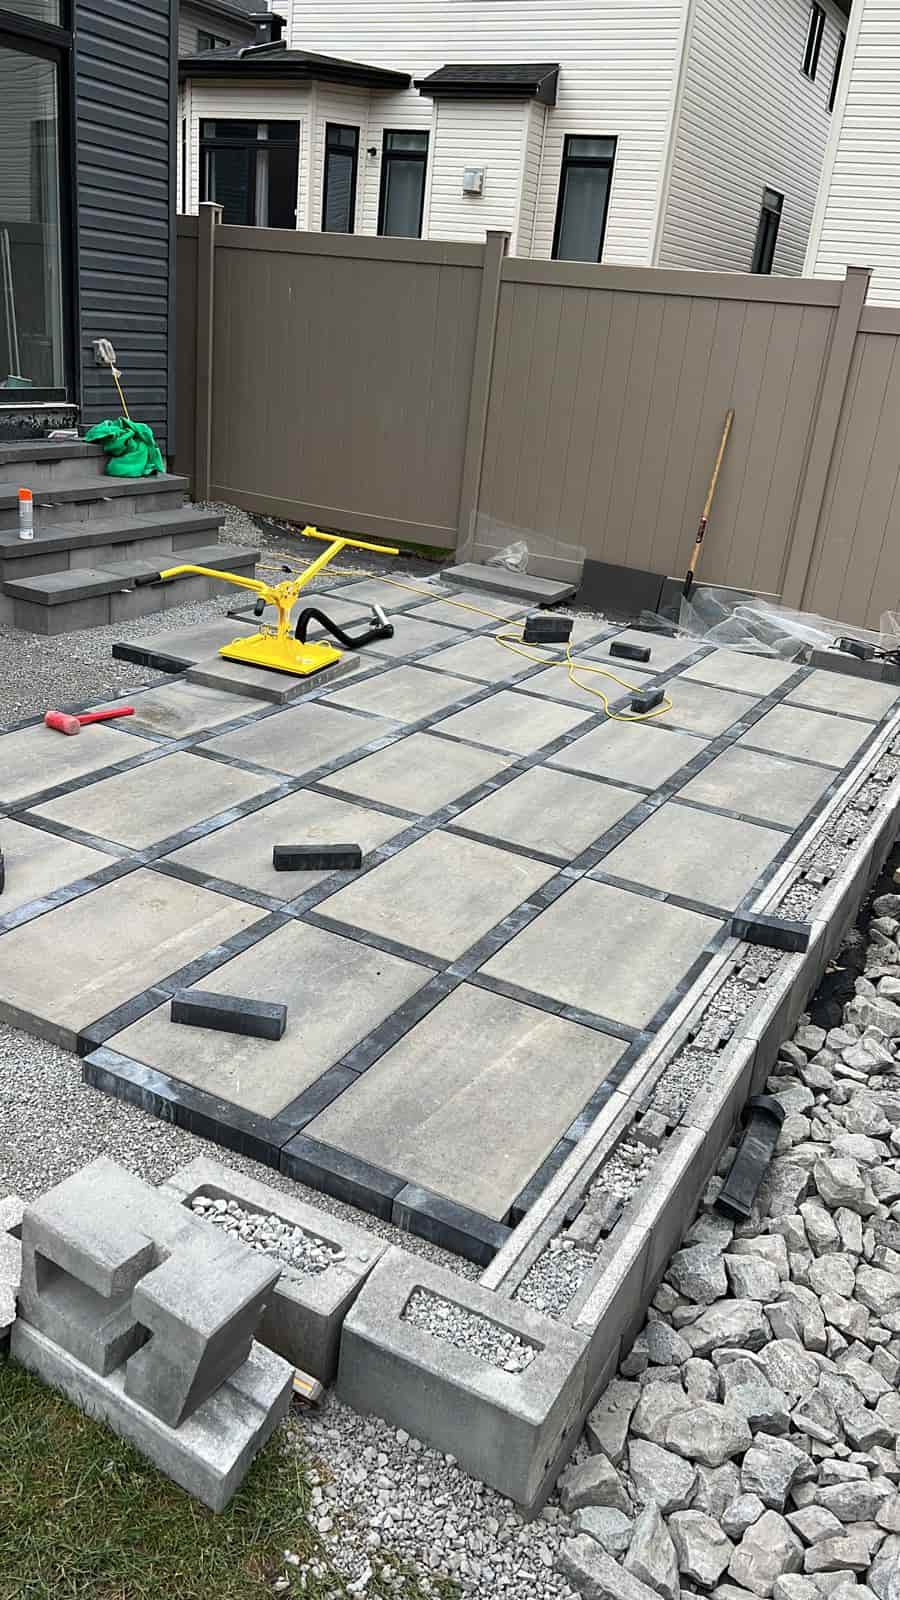 Installation of interlocking tiles in shades of gray on a residential patio, with construction tools, edging units, and a compacting machine on site.